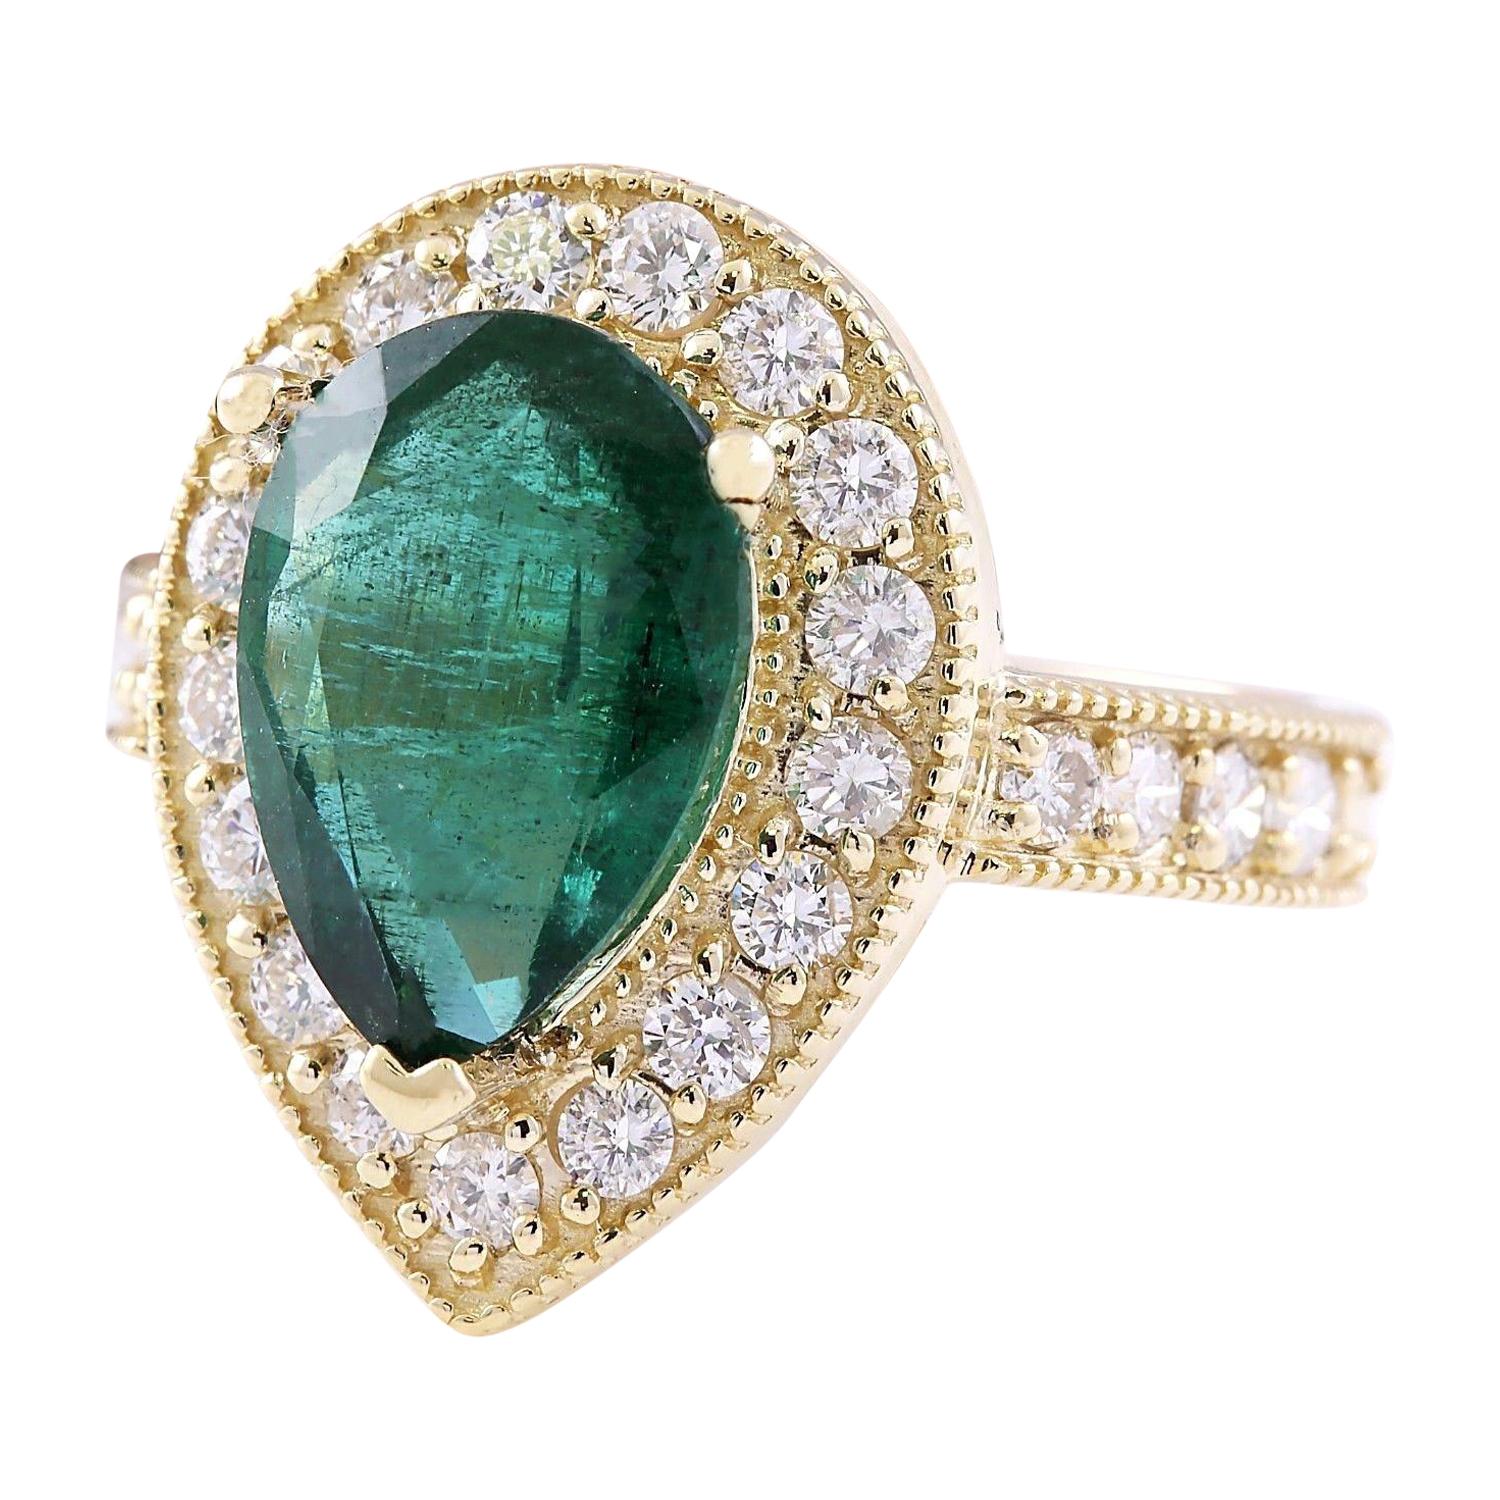 5.70 Carat Natural Emerald 14K Solid Yellow Gold Diamond Ring
 Item Type: Ring
 Item Style: Engagement
 Material: 14K Yellow Gold
 Mainstone: Emerald
 Stone Color: Green
 Stone Weight: 4.50 Carat
 Stone Shape: Pear
 Stone Quantity: 1
 Stone